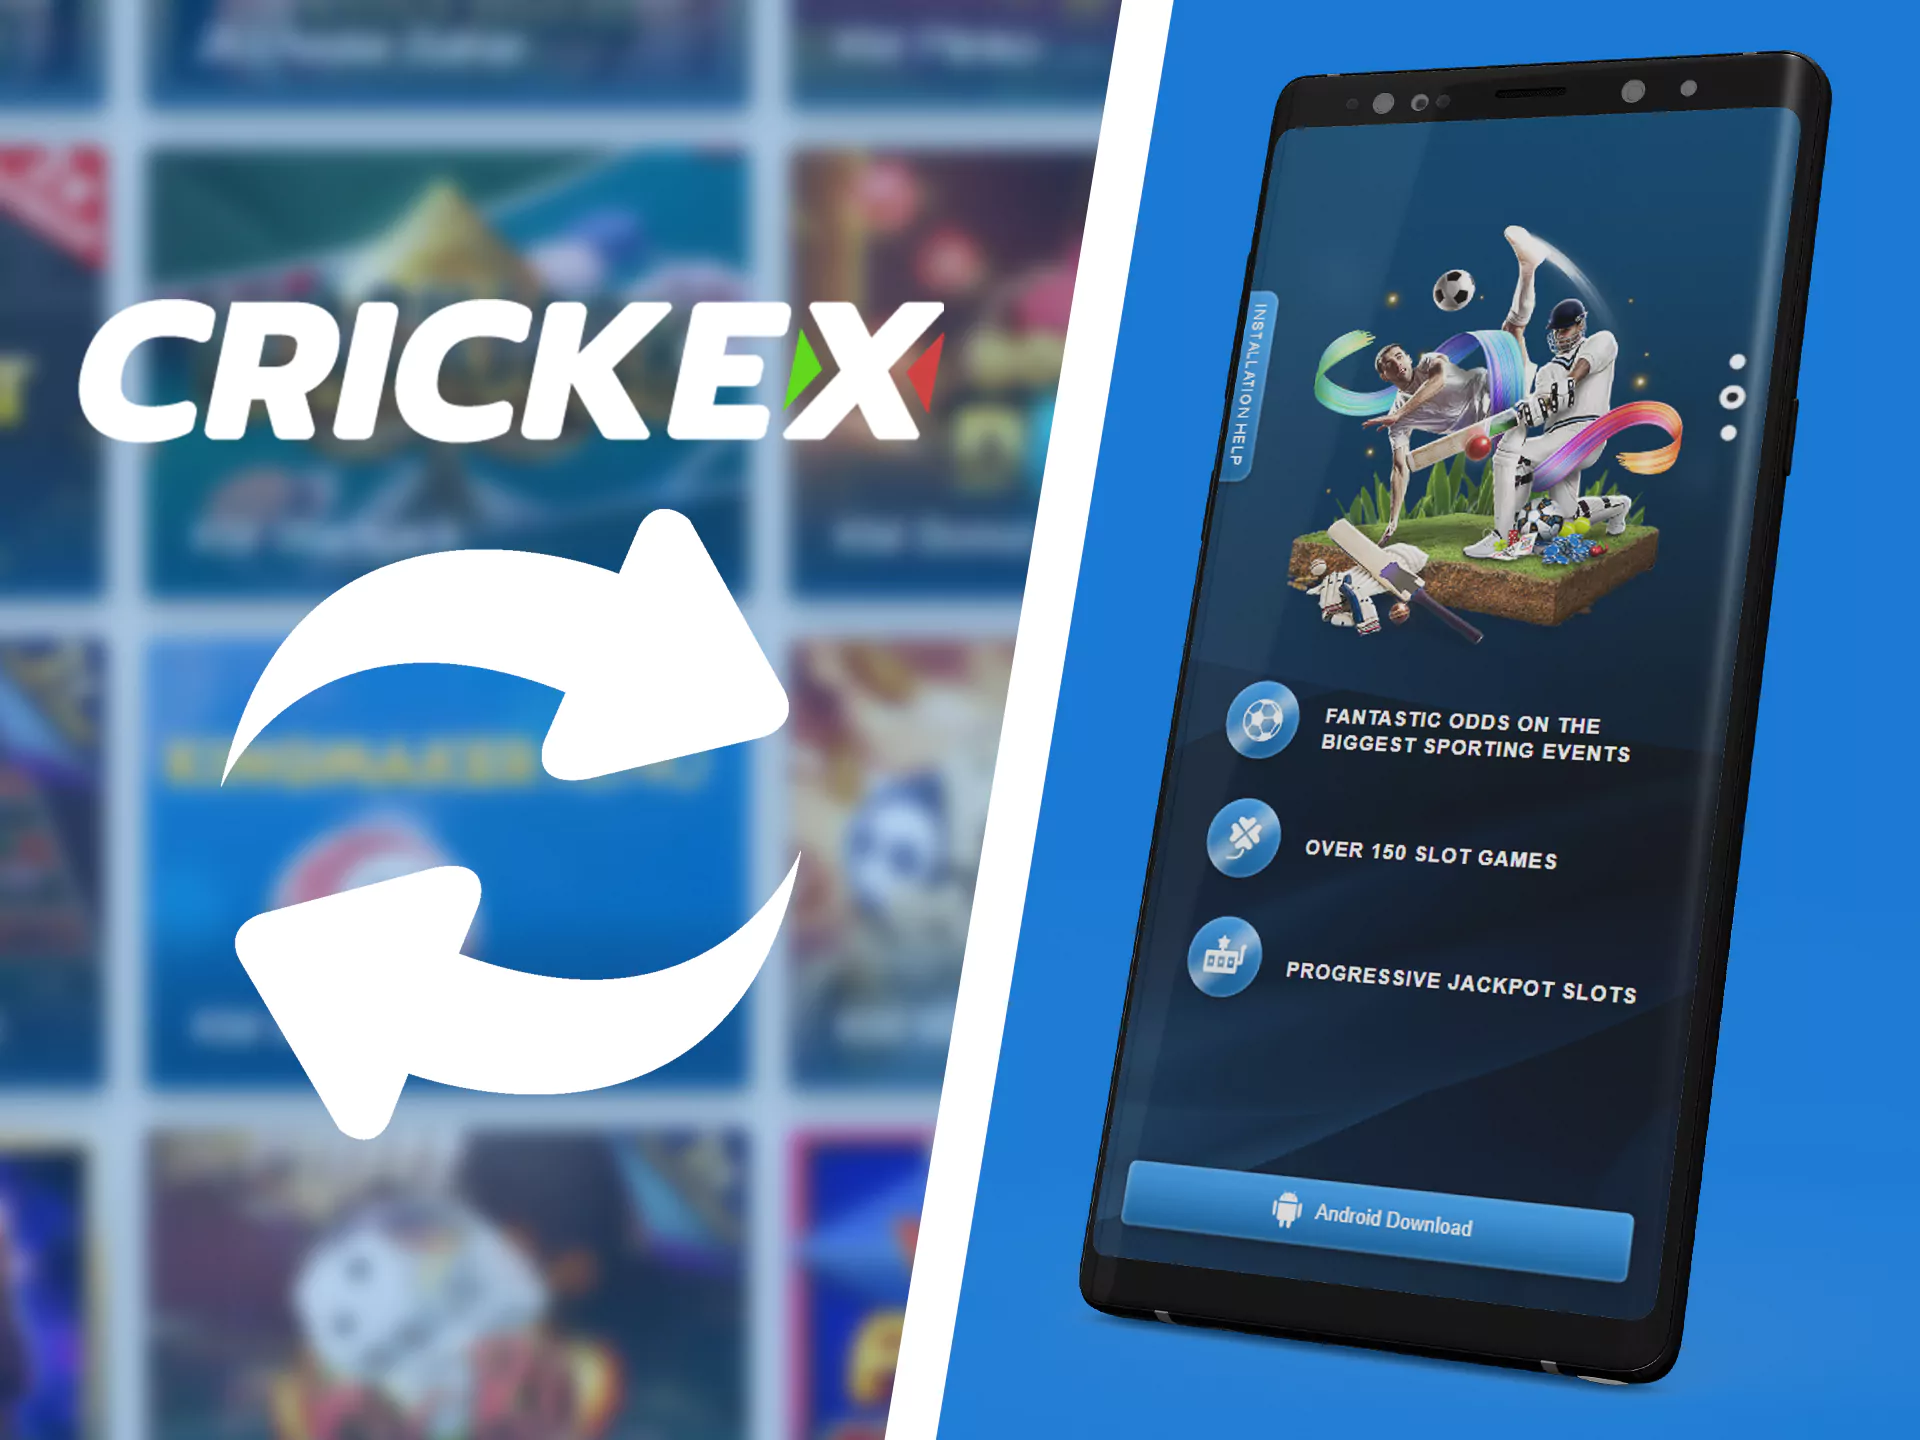 Update Crickex app on official site.